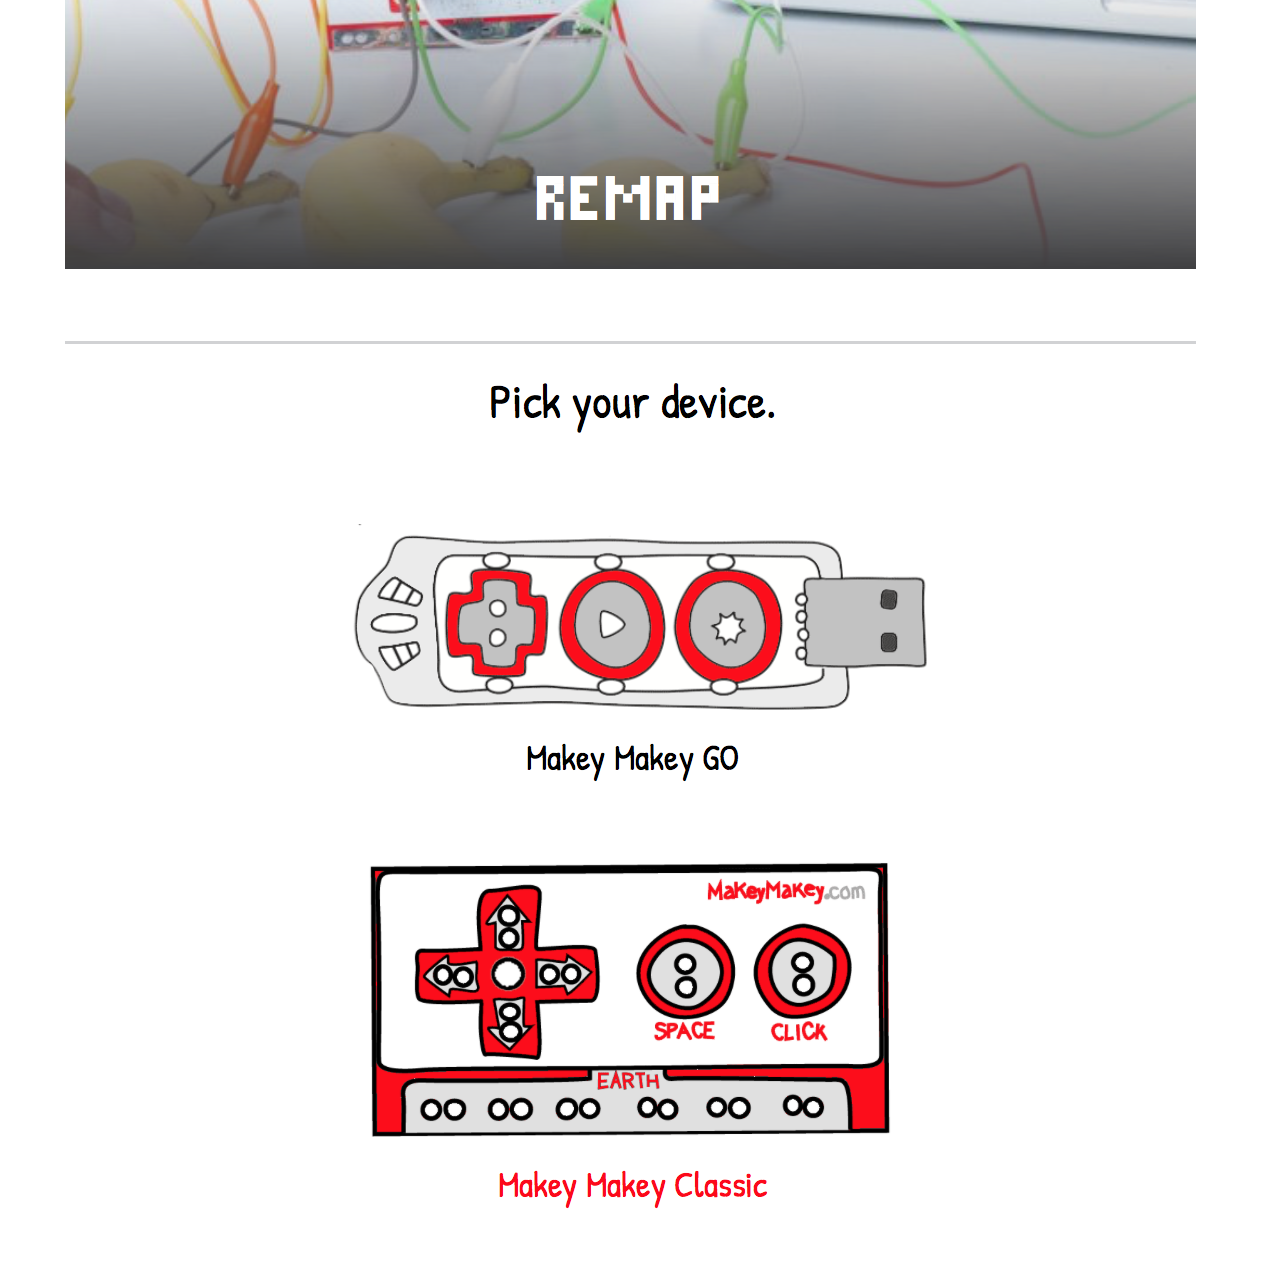 Remap a Makey Makey Classic or Makey Makey Go!